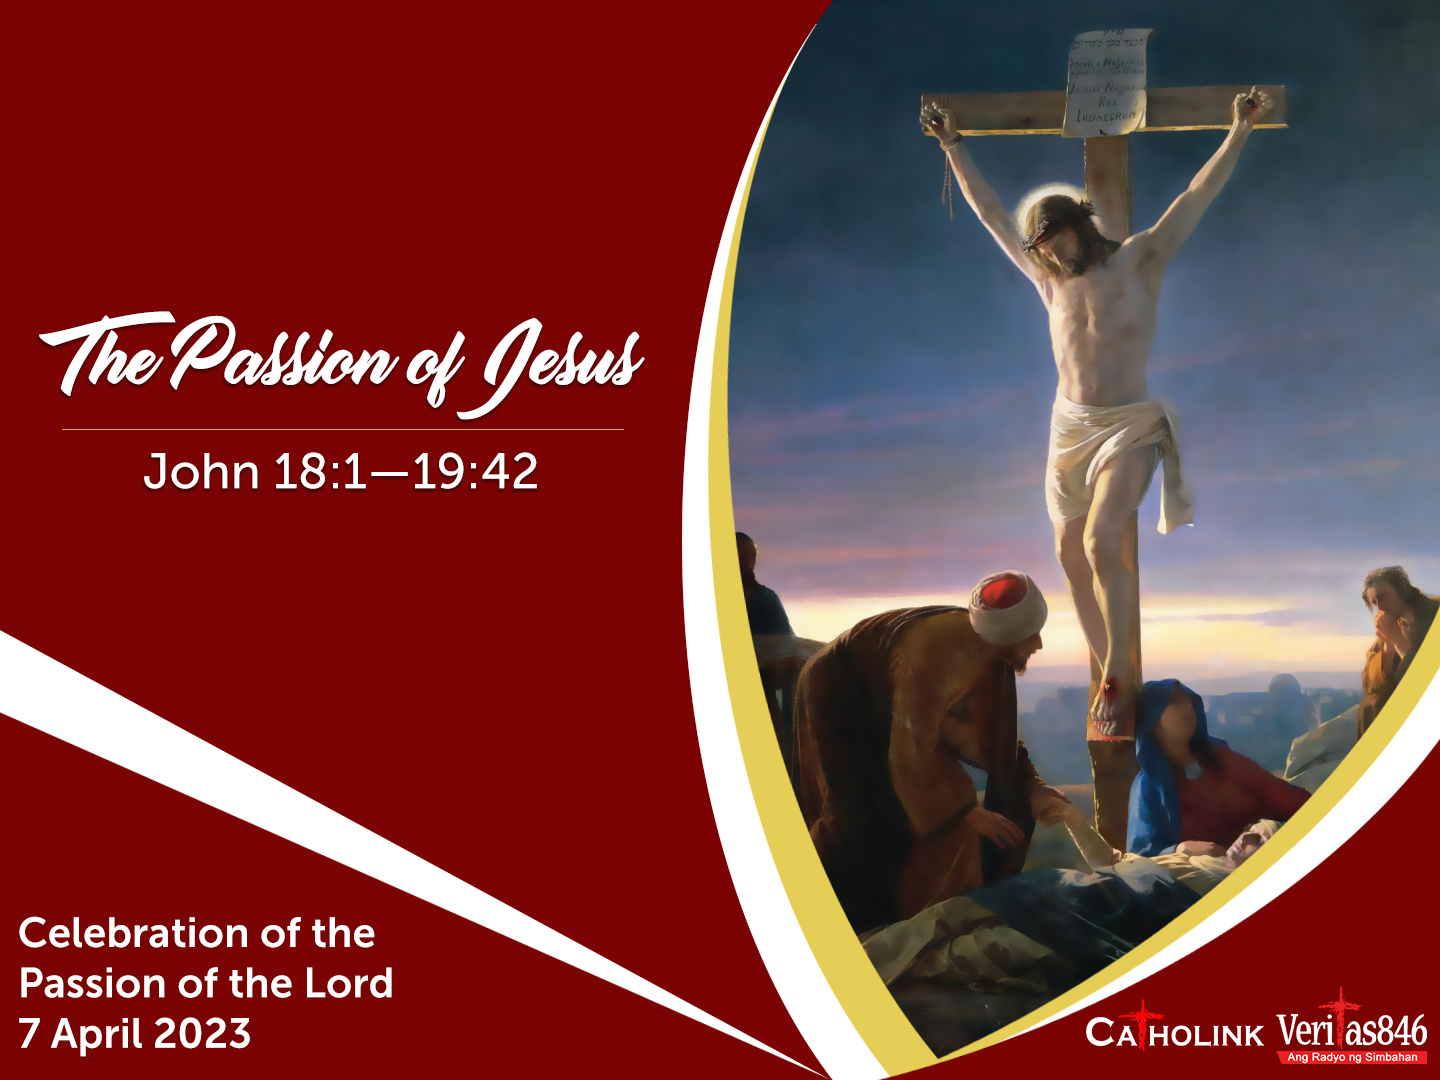 Celebration of the Passion of the Lord - Catholink